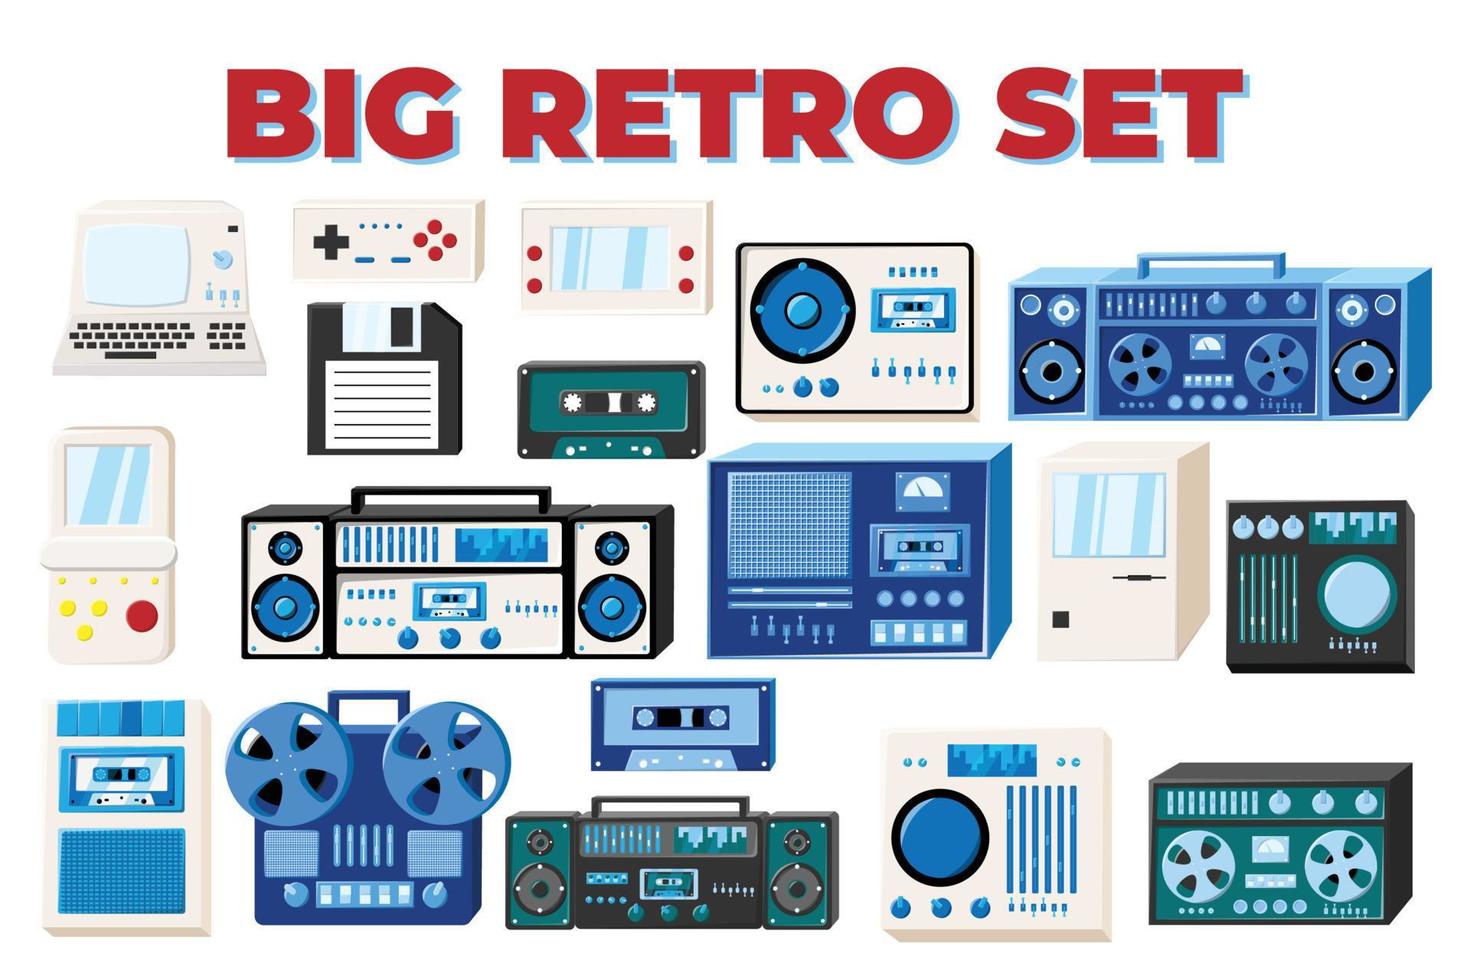 Set of old retro vintage isometry tech electronics cassette audio tape recorder, computer, game consoles for video games from the 70s, 80s, 90s. Vector illustration